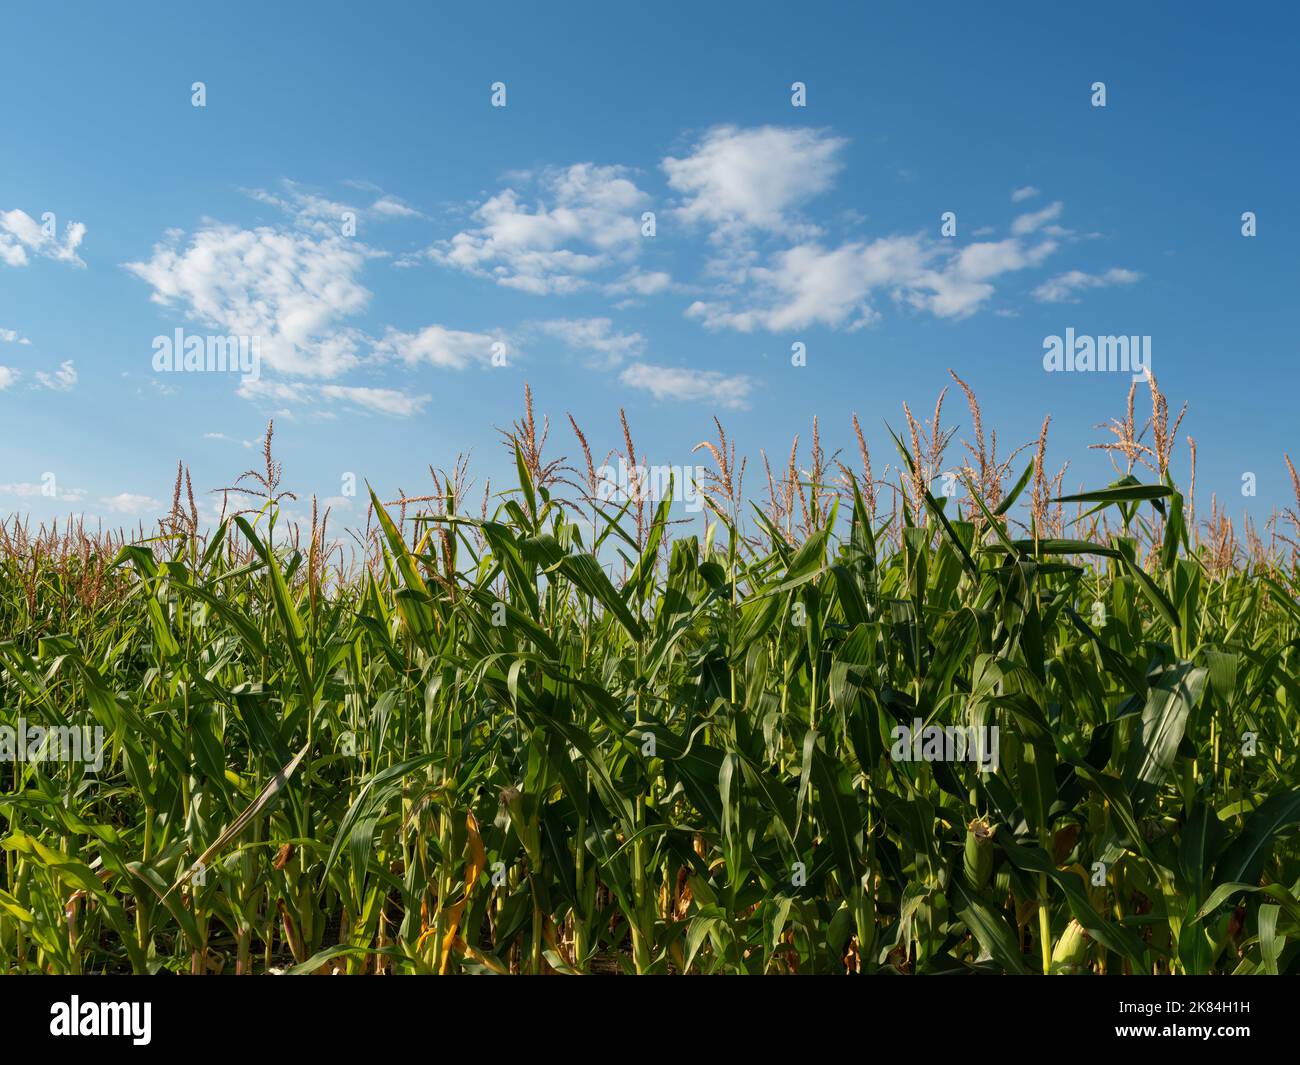 Close up of sunlit corn stalks topped with tassels in an agricultural field with blue sky and white clouds above. Image has copy space. Stock Photo